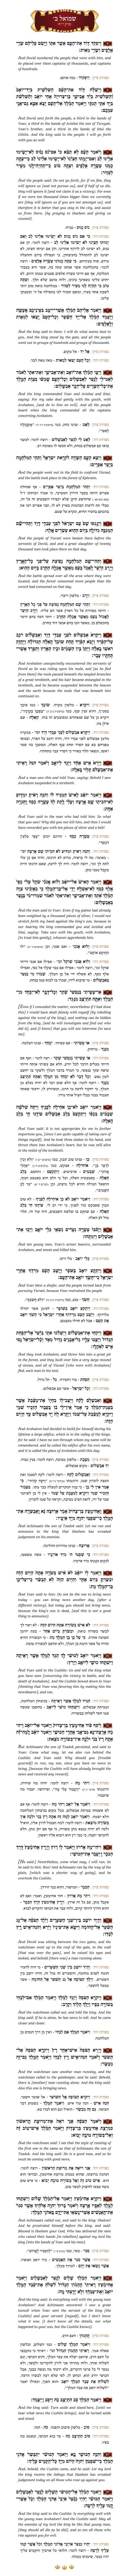 Sefer Shmuel 2 Chapter 18 with commentary